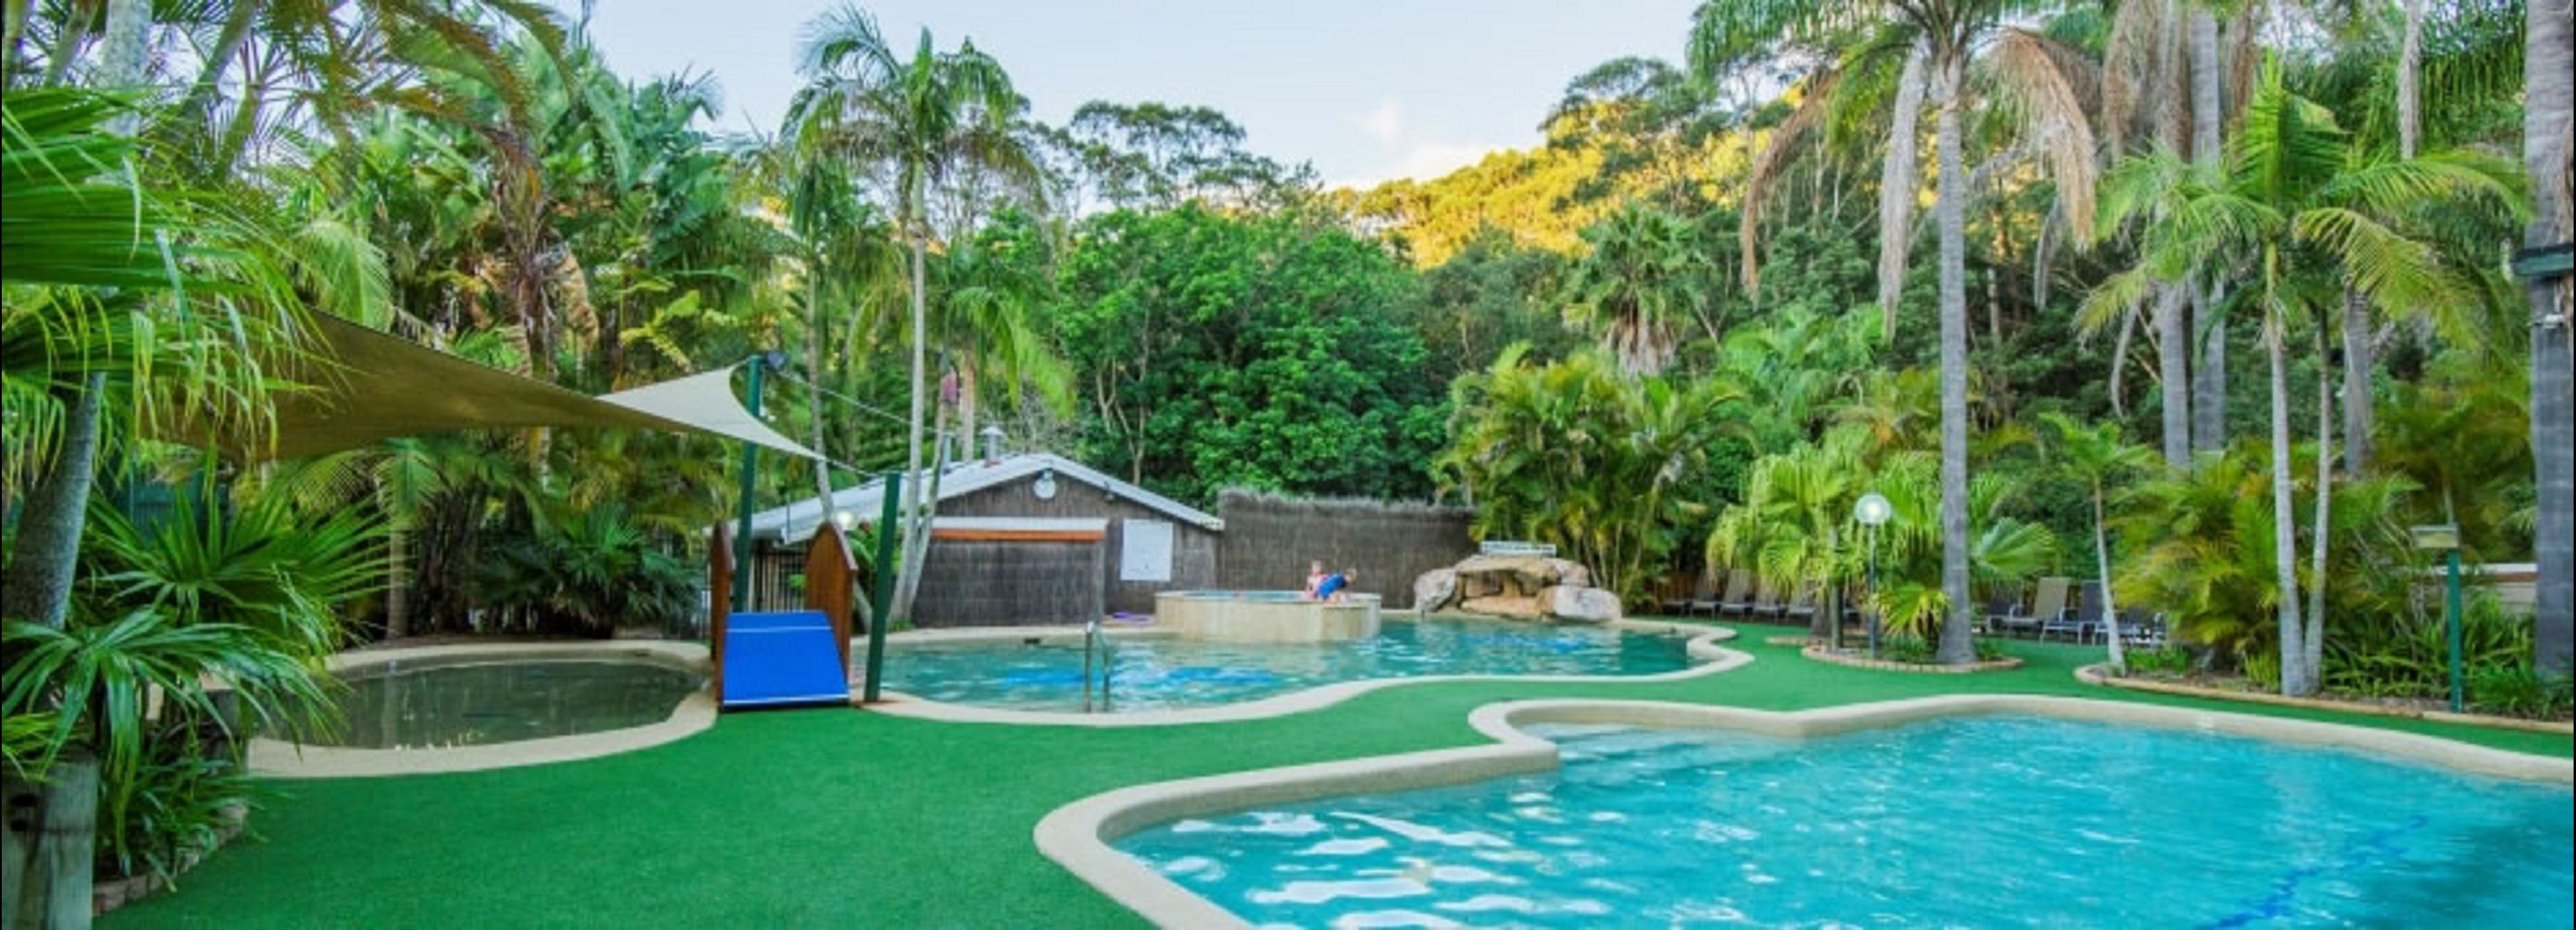 The Palms at Avoca - Accommodation Cooktown